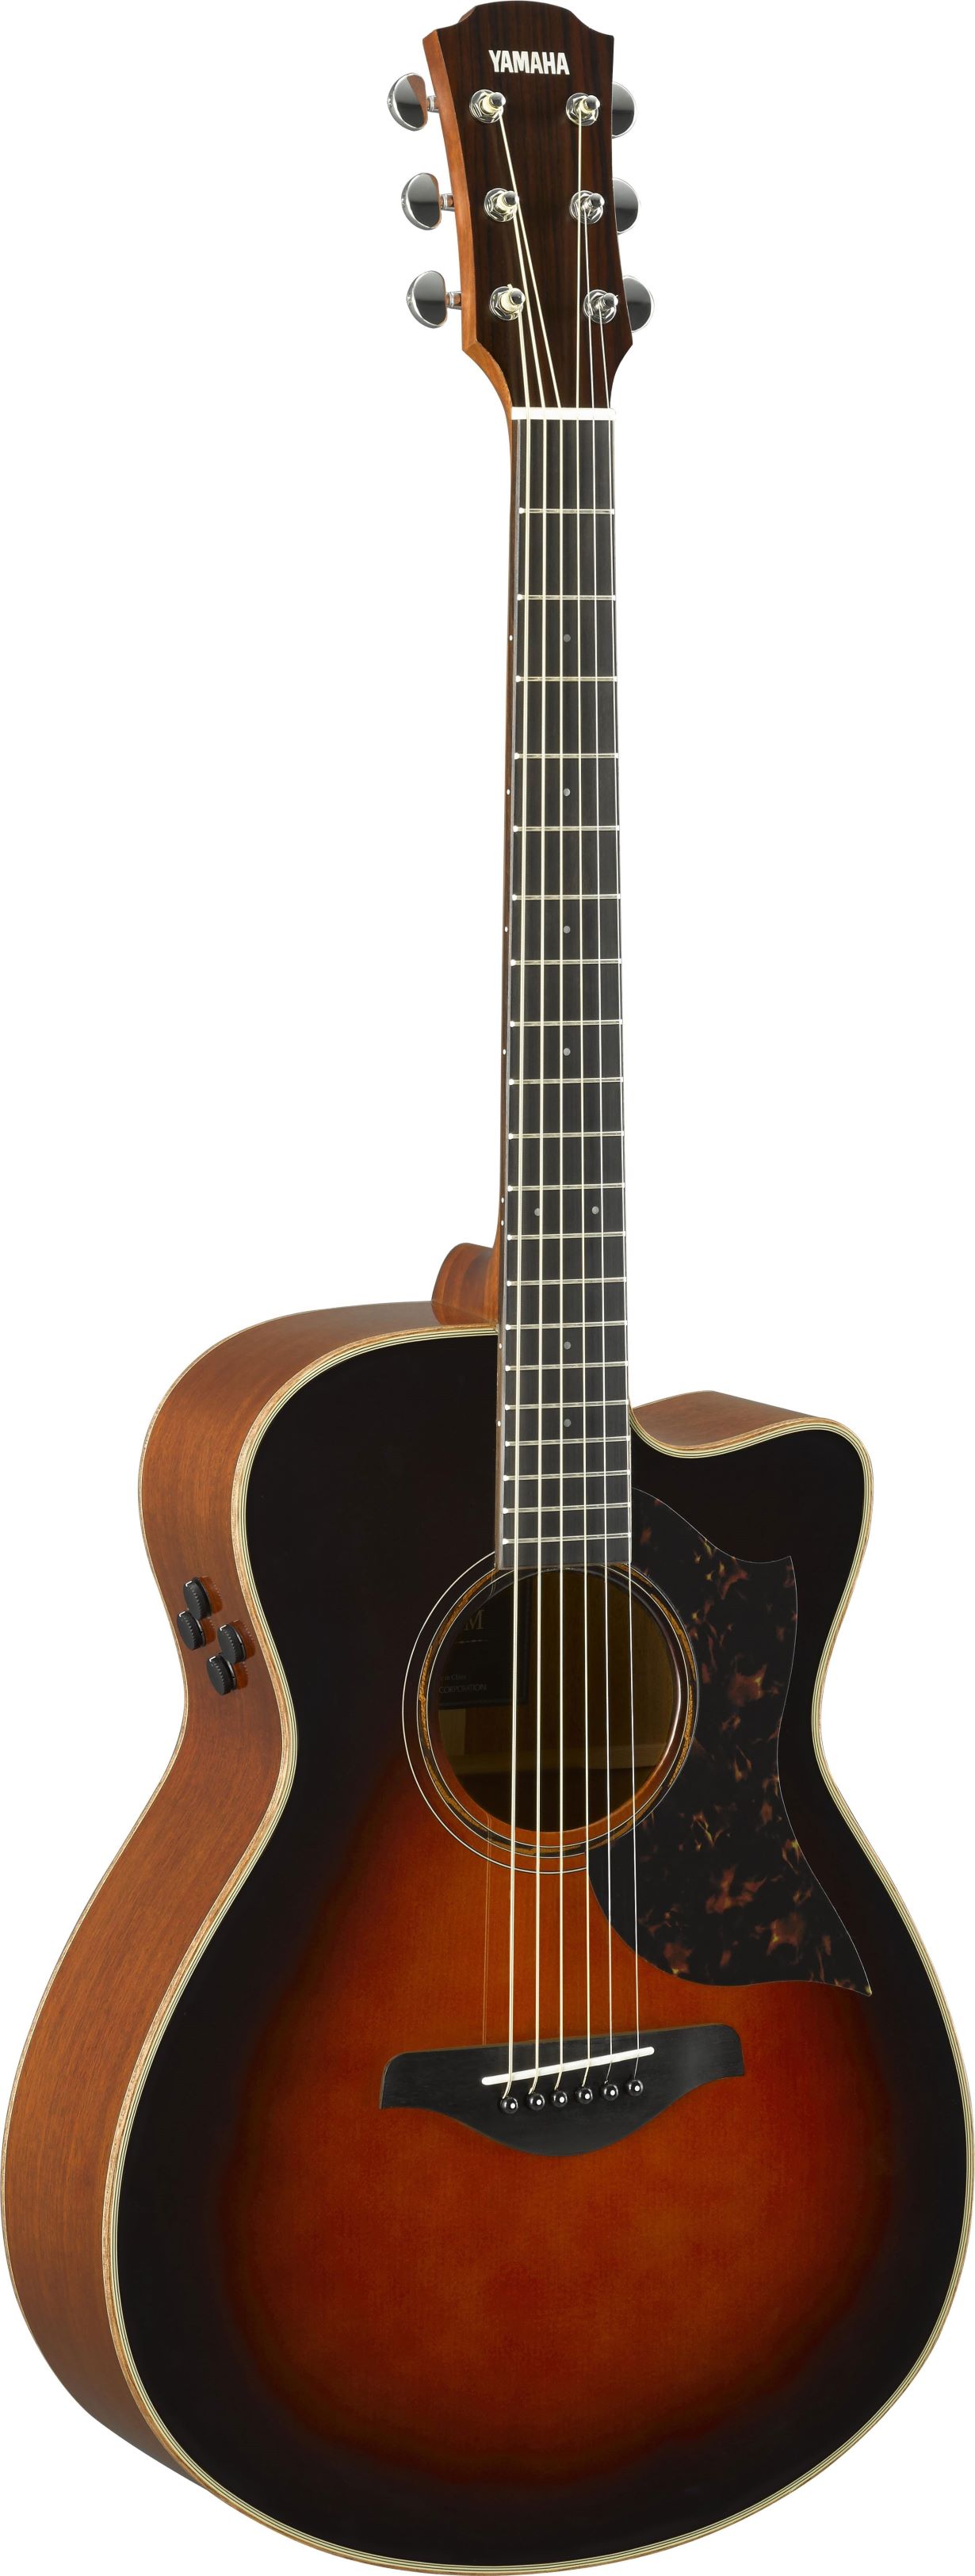 Yamaha AC3M Concert Cutaway - Sunburst Acoustic-Electric Guitar, Sitka Spruce Top, Solid Mahogany Back and Sides for sale